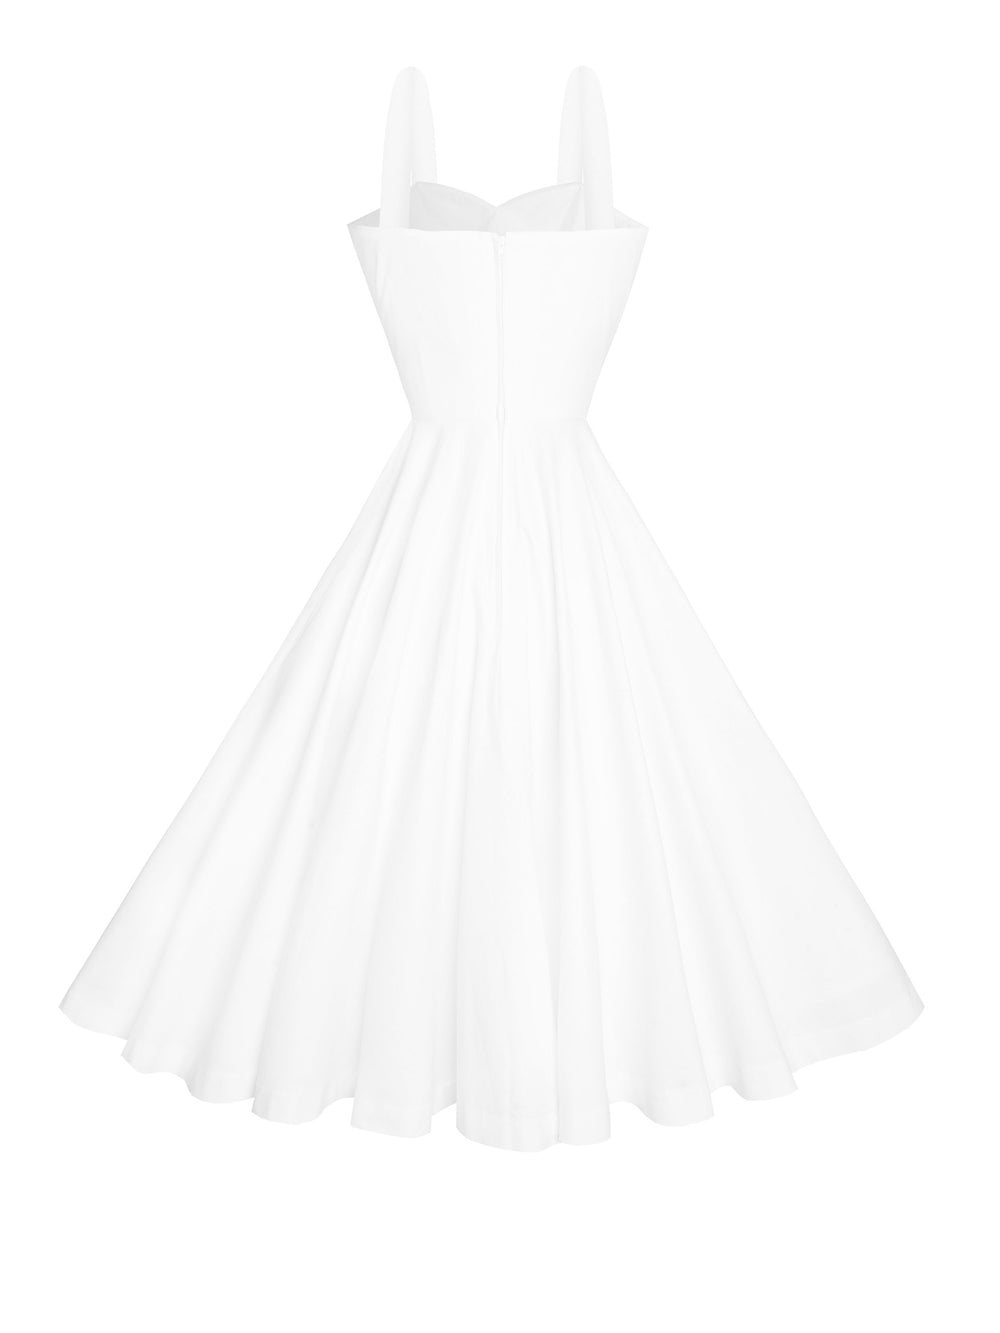 RTS - Size S - Catalina Dress in White Cotton